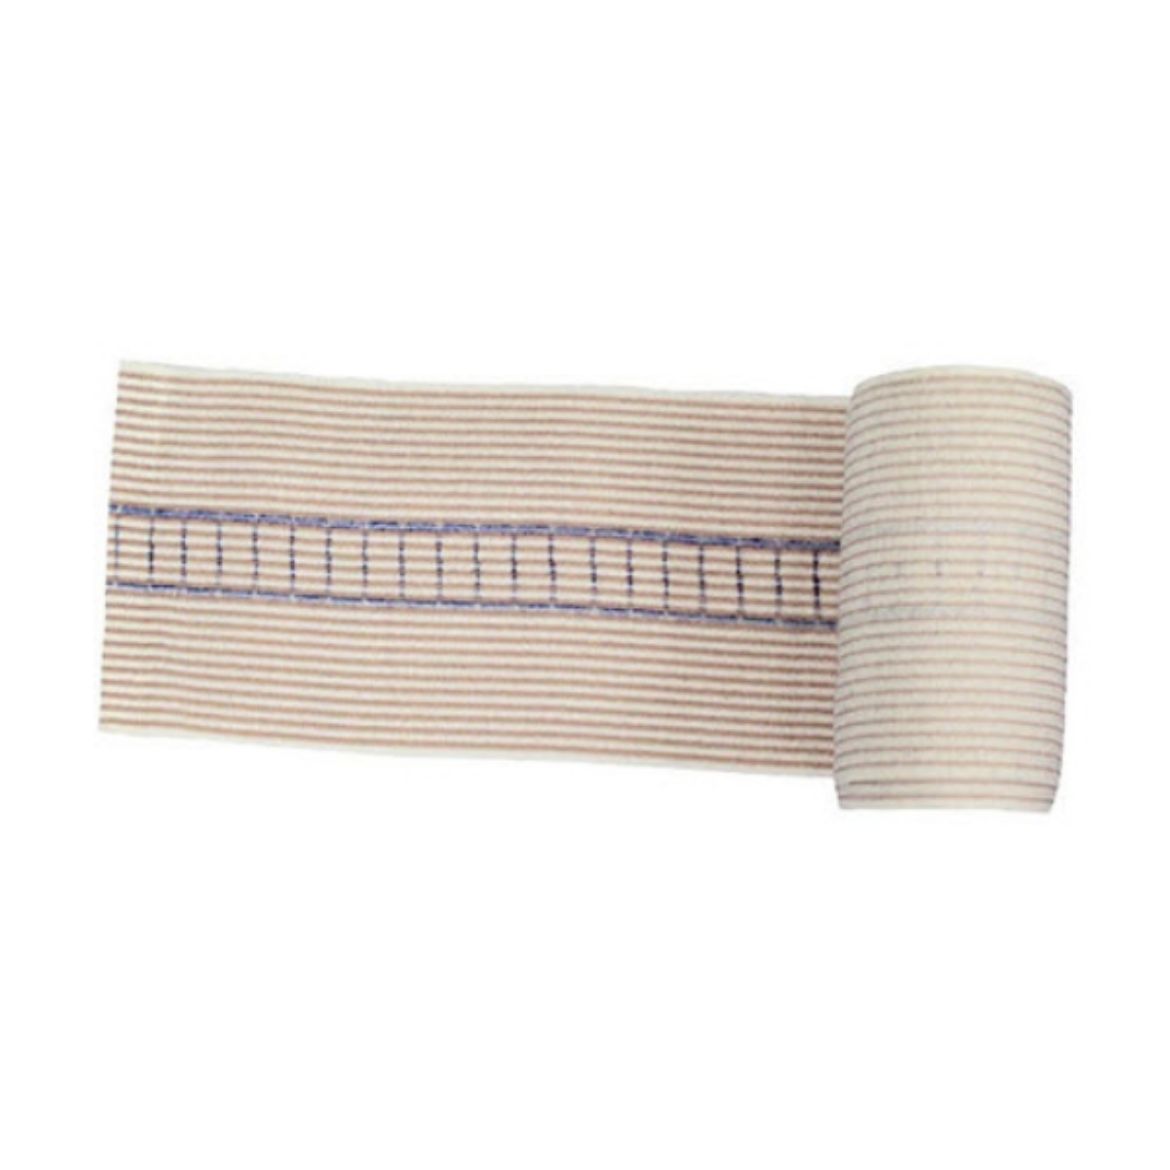 Picture of AEROFORM SNAKE BITE BANDAGE, WITH INDICATORS - 10CM X 4.5M (STRETCHED)